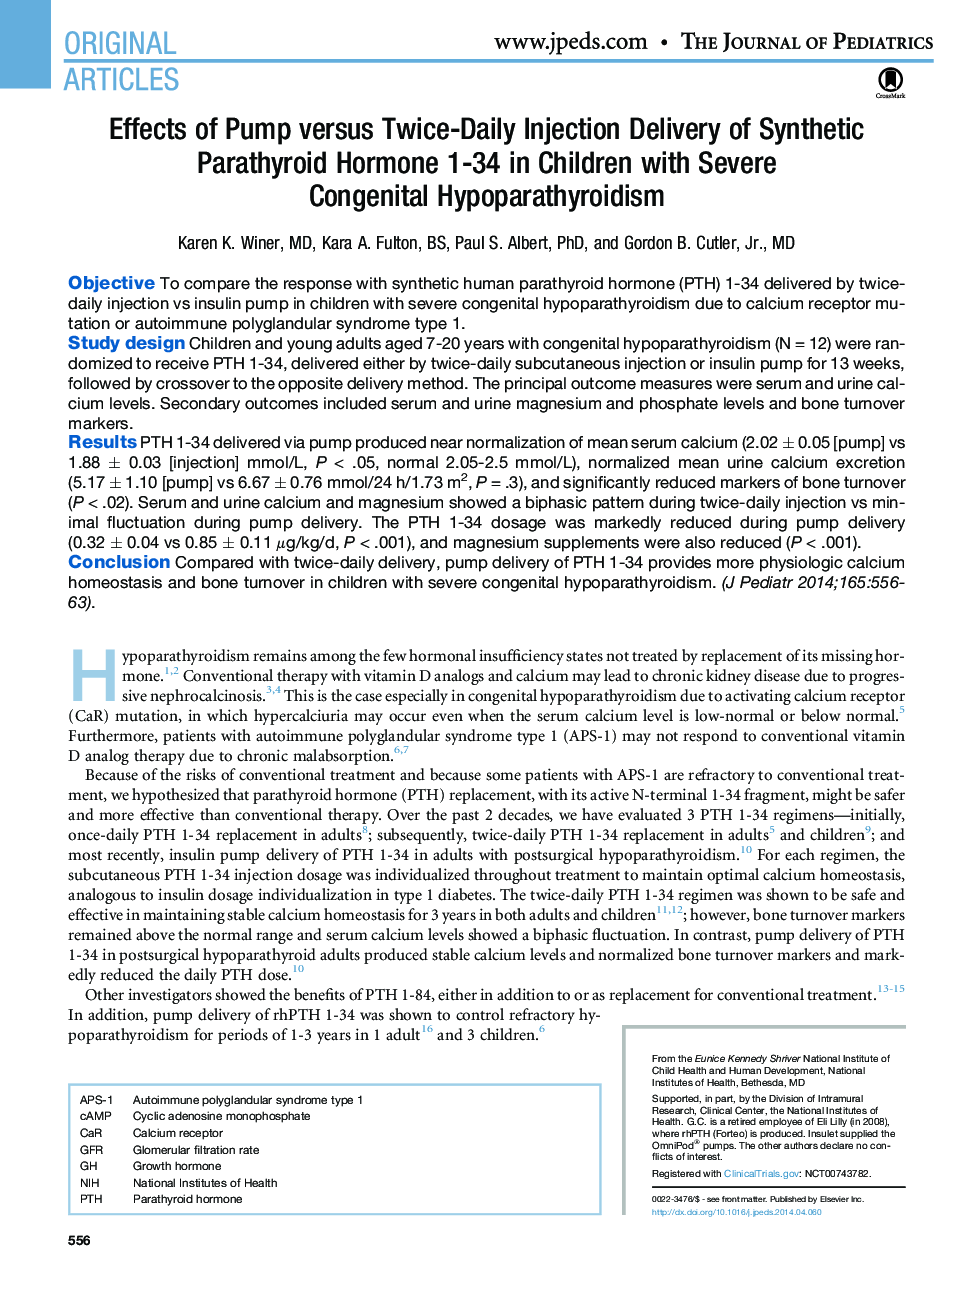 Effects of Pump versus Twice-Daily Injection Delivery of Synthetic Parathyroid Hormone 1-34 in Children with Severe CongenitalÂ Hypoparathyroidism